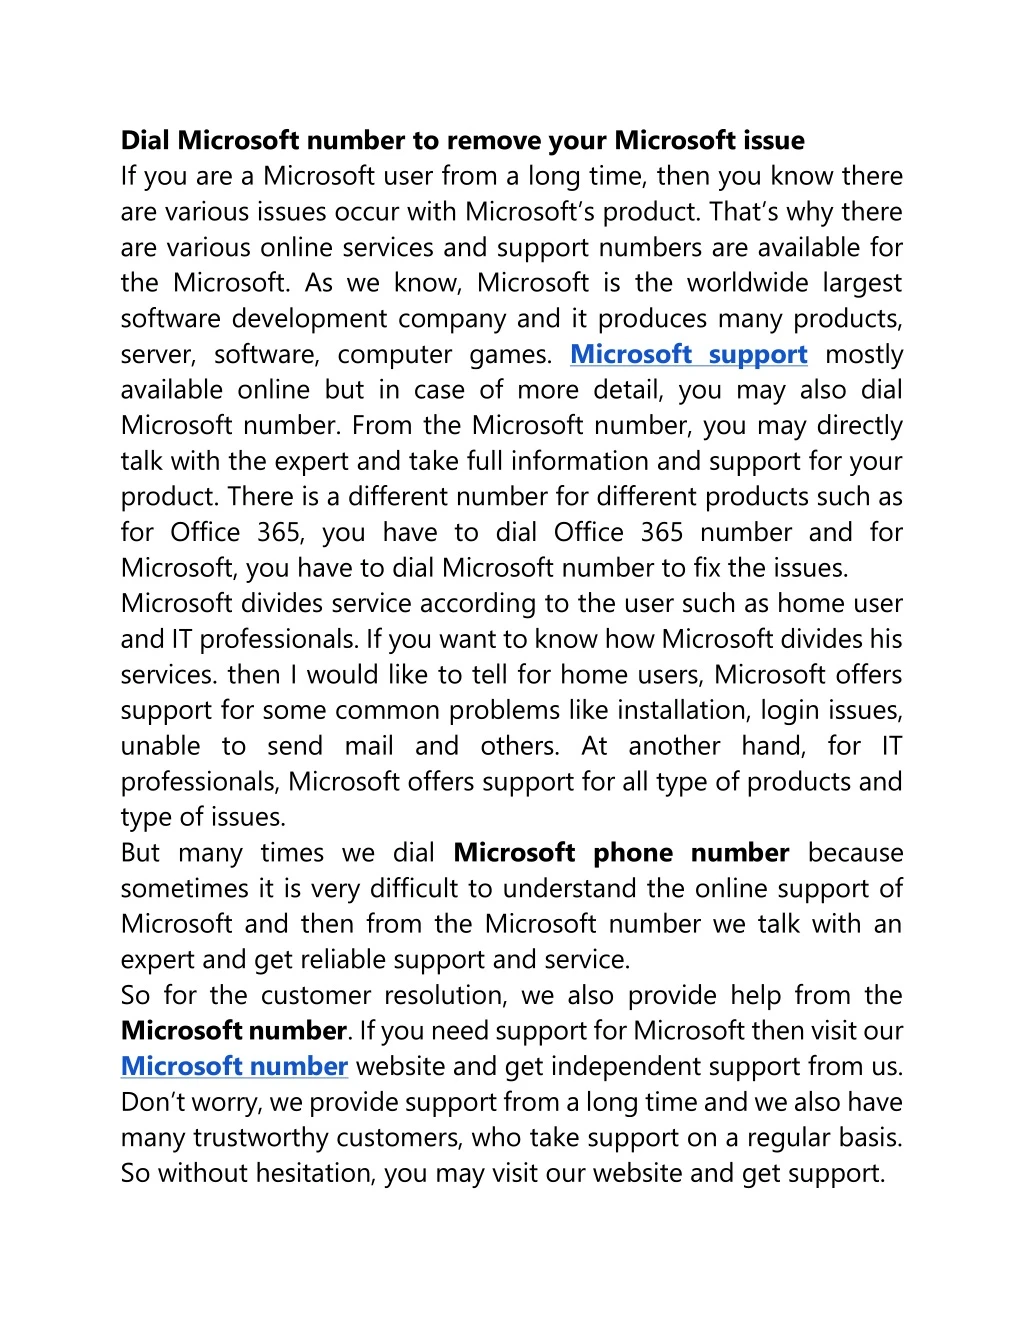 dial microsoft number to remove your microsoft